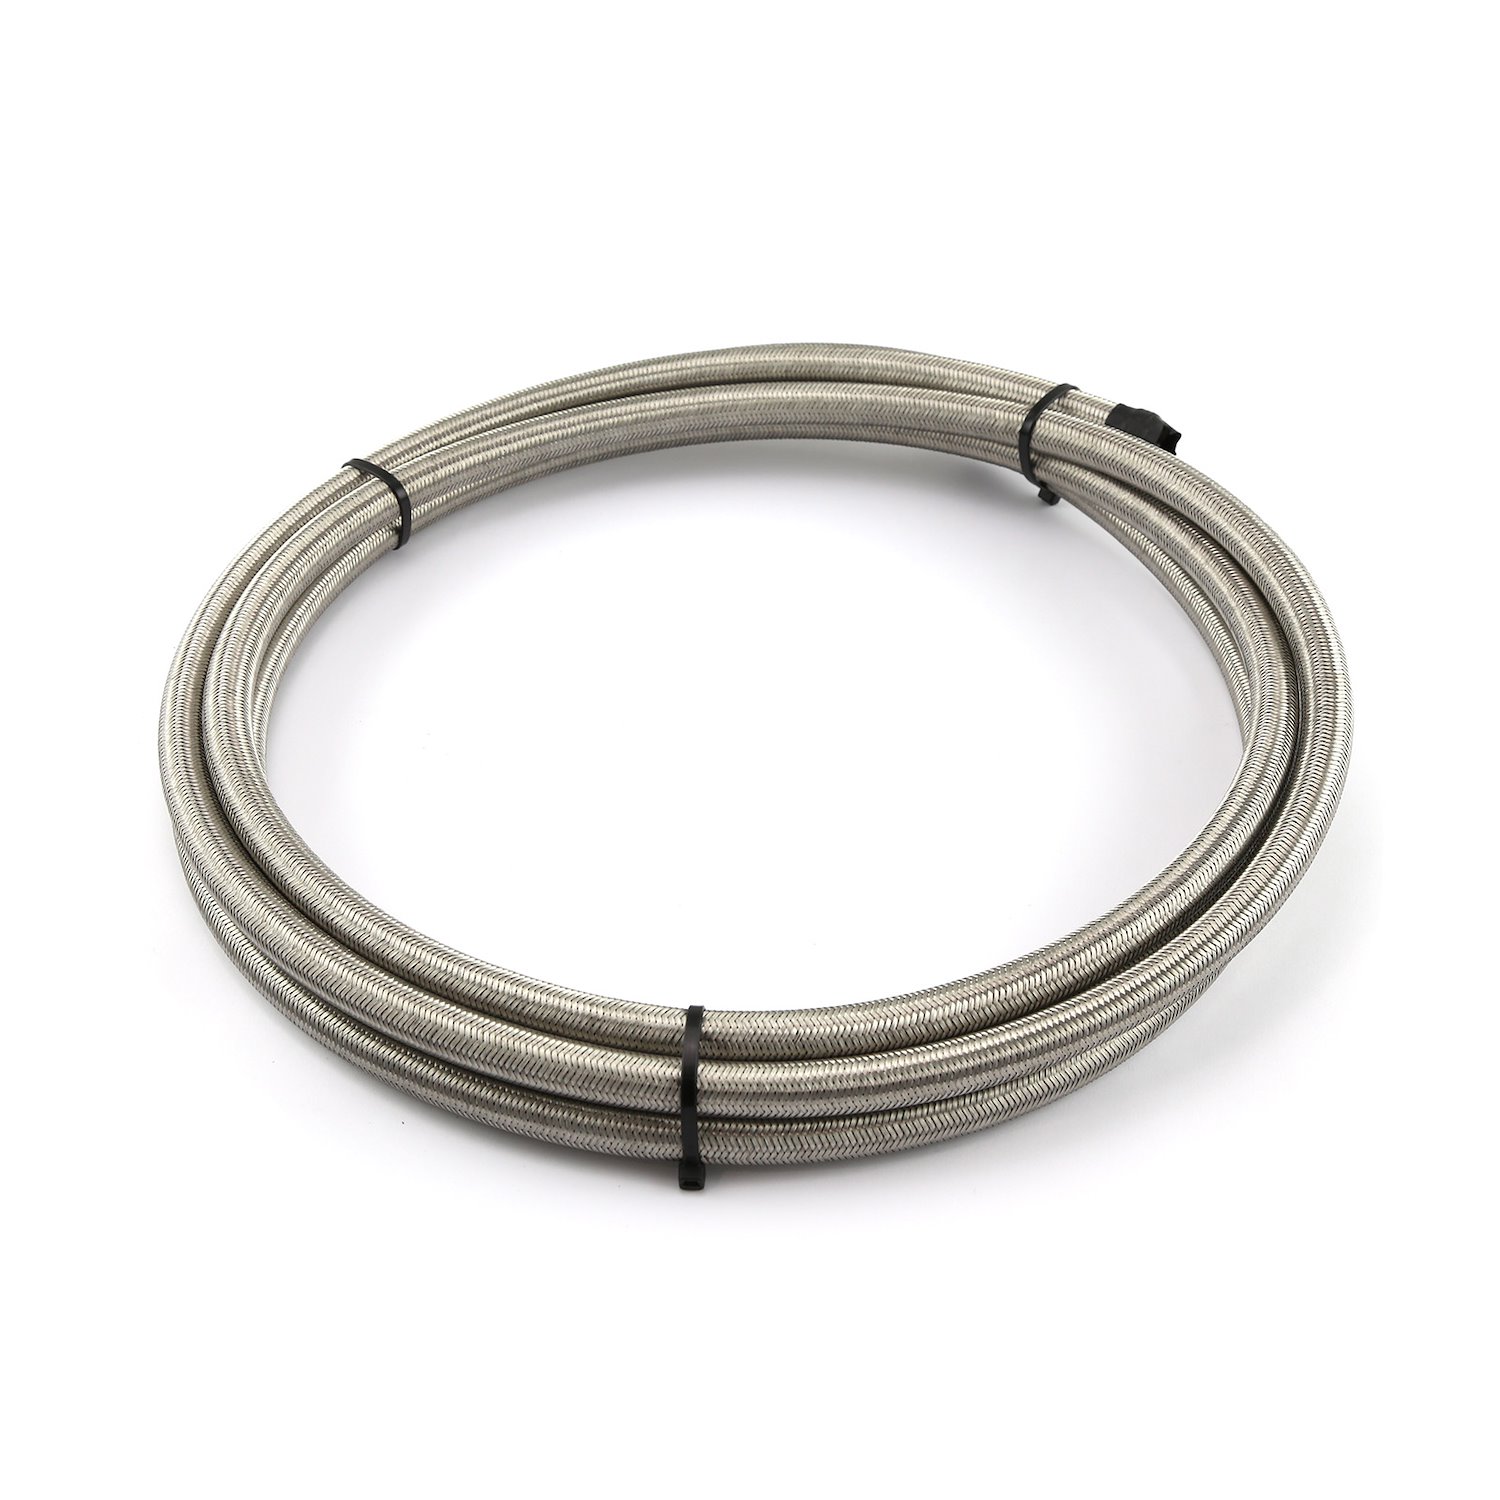 100 Series Stainless Steel Braided Hose -10 AN